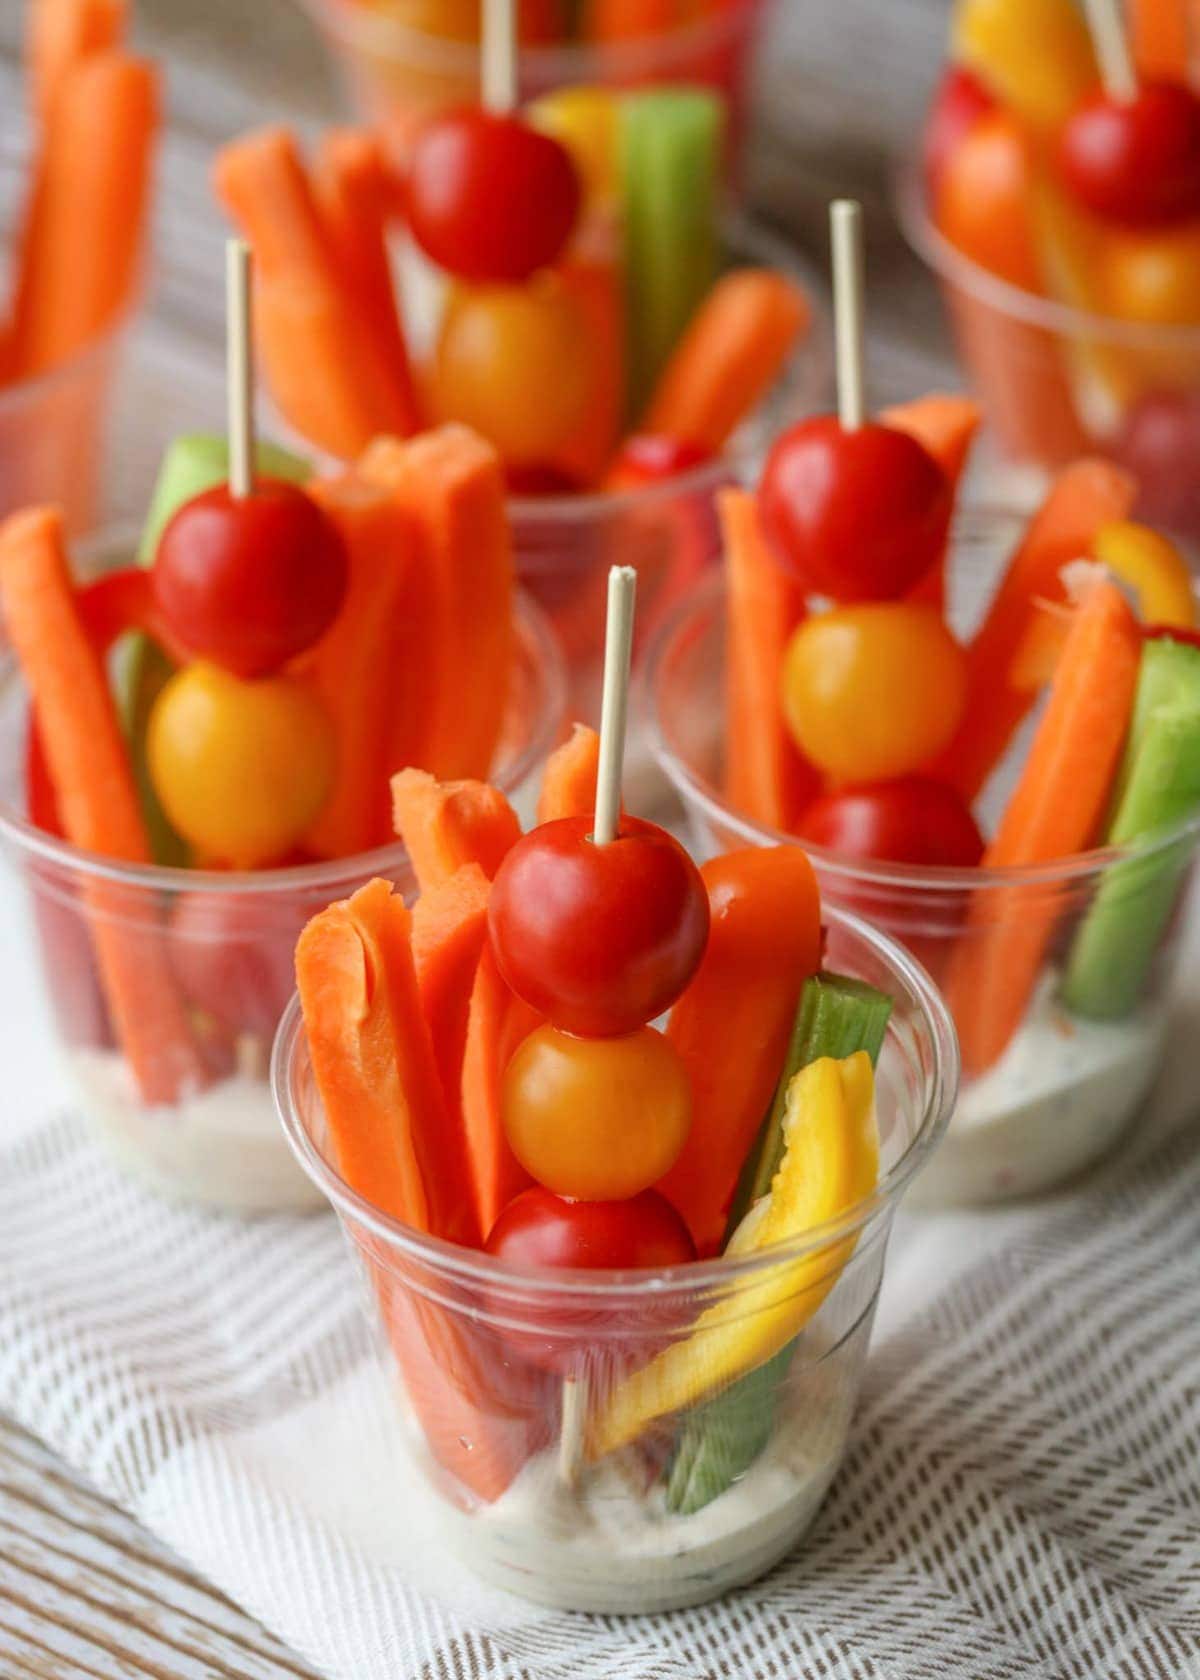 Veggie Cups image with vegetables and dip in a cup.